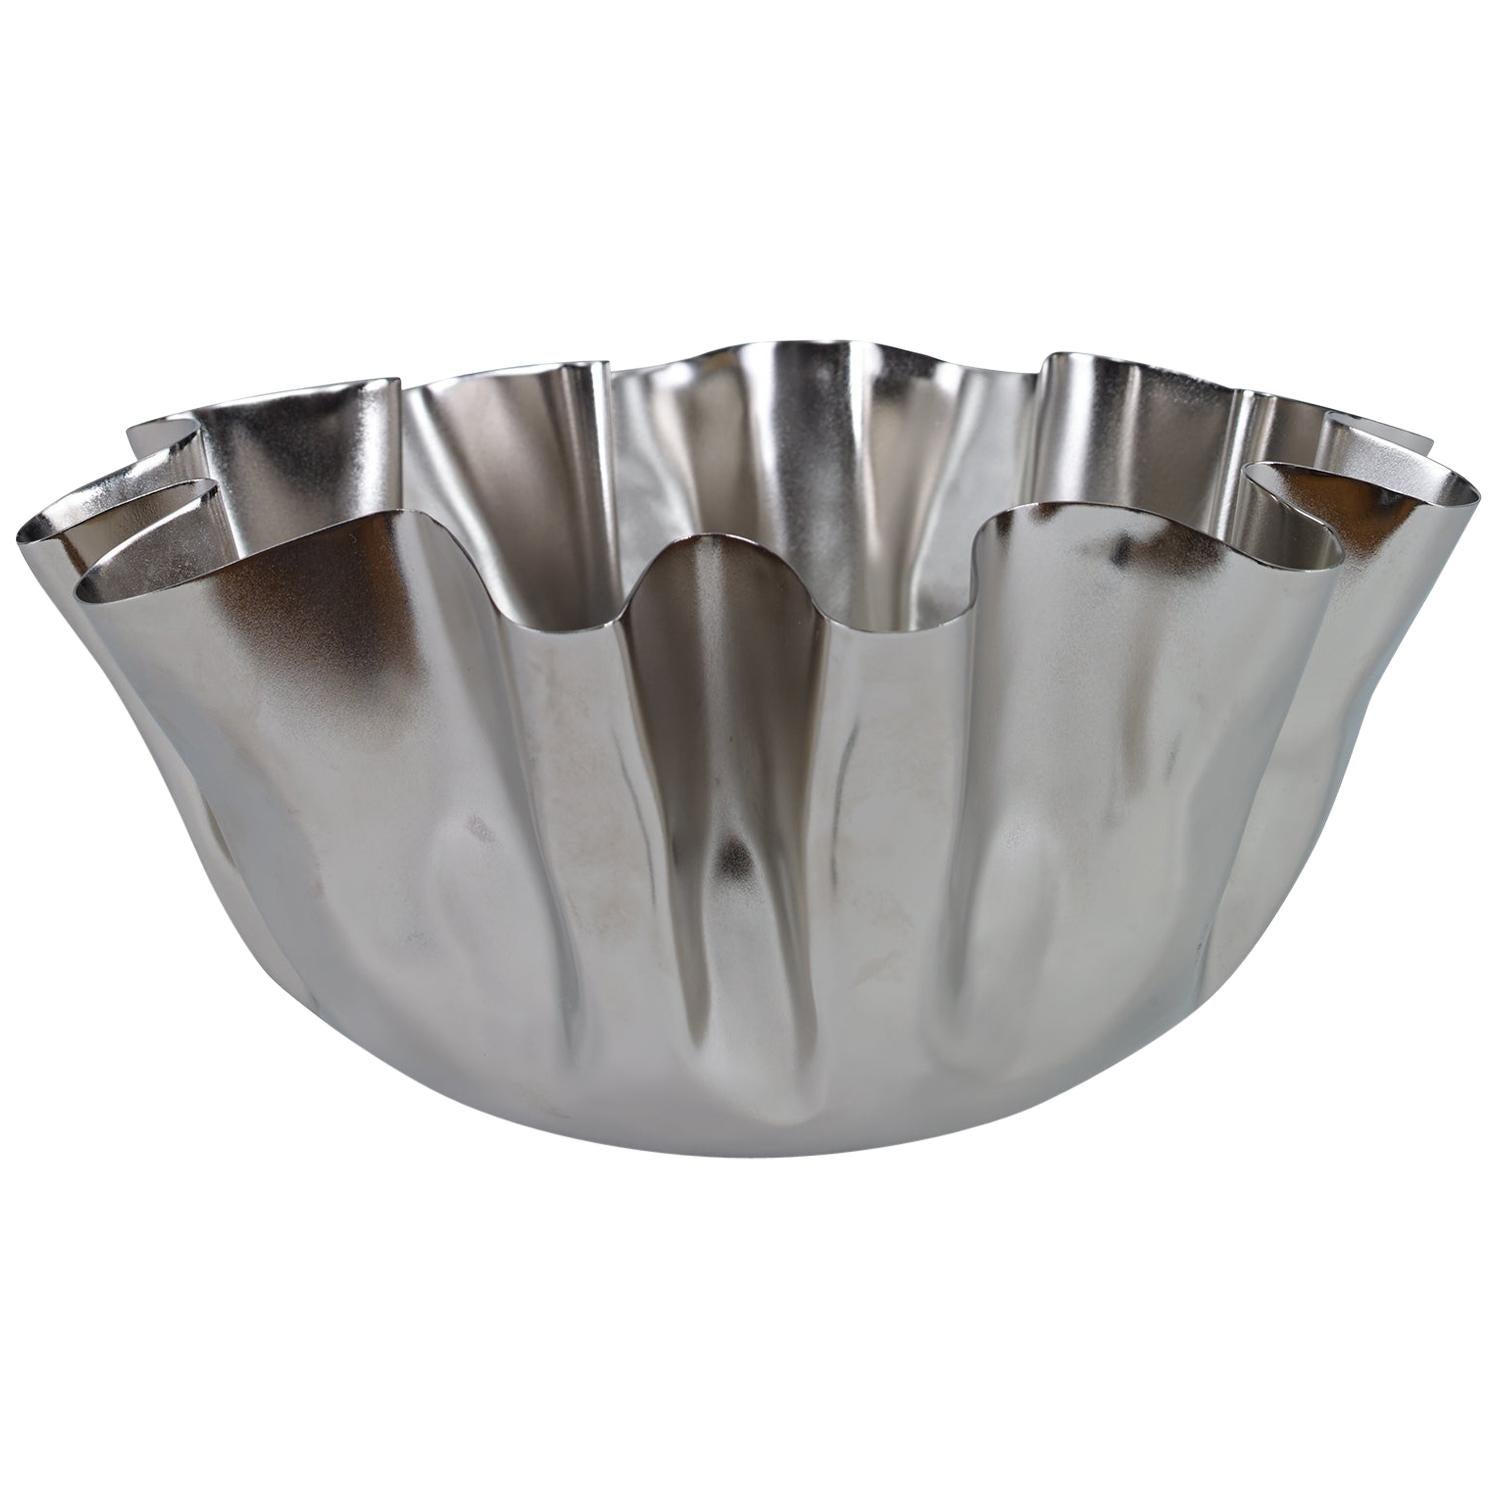 Drapery Small Bowl in Nickel by CuratedKravet